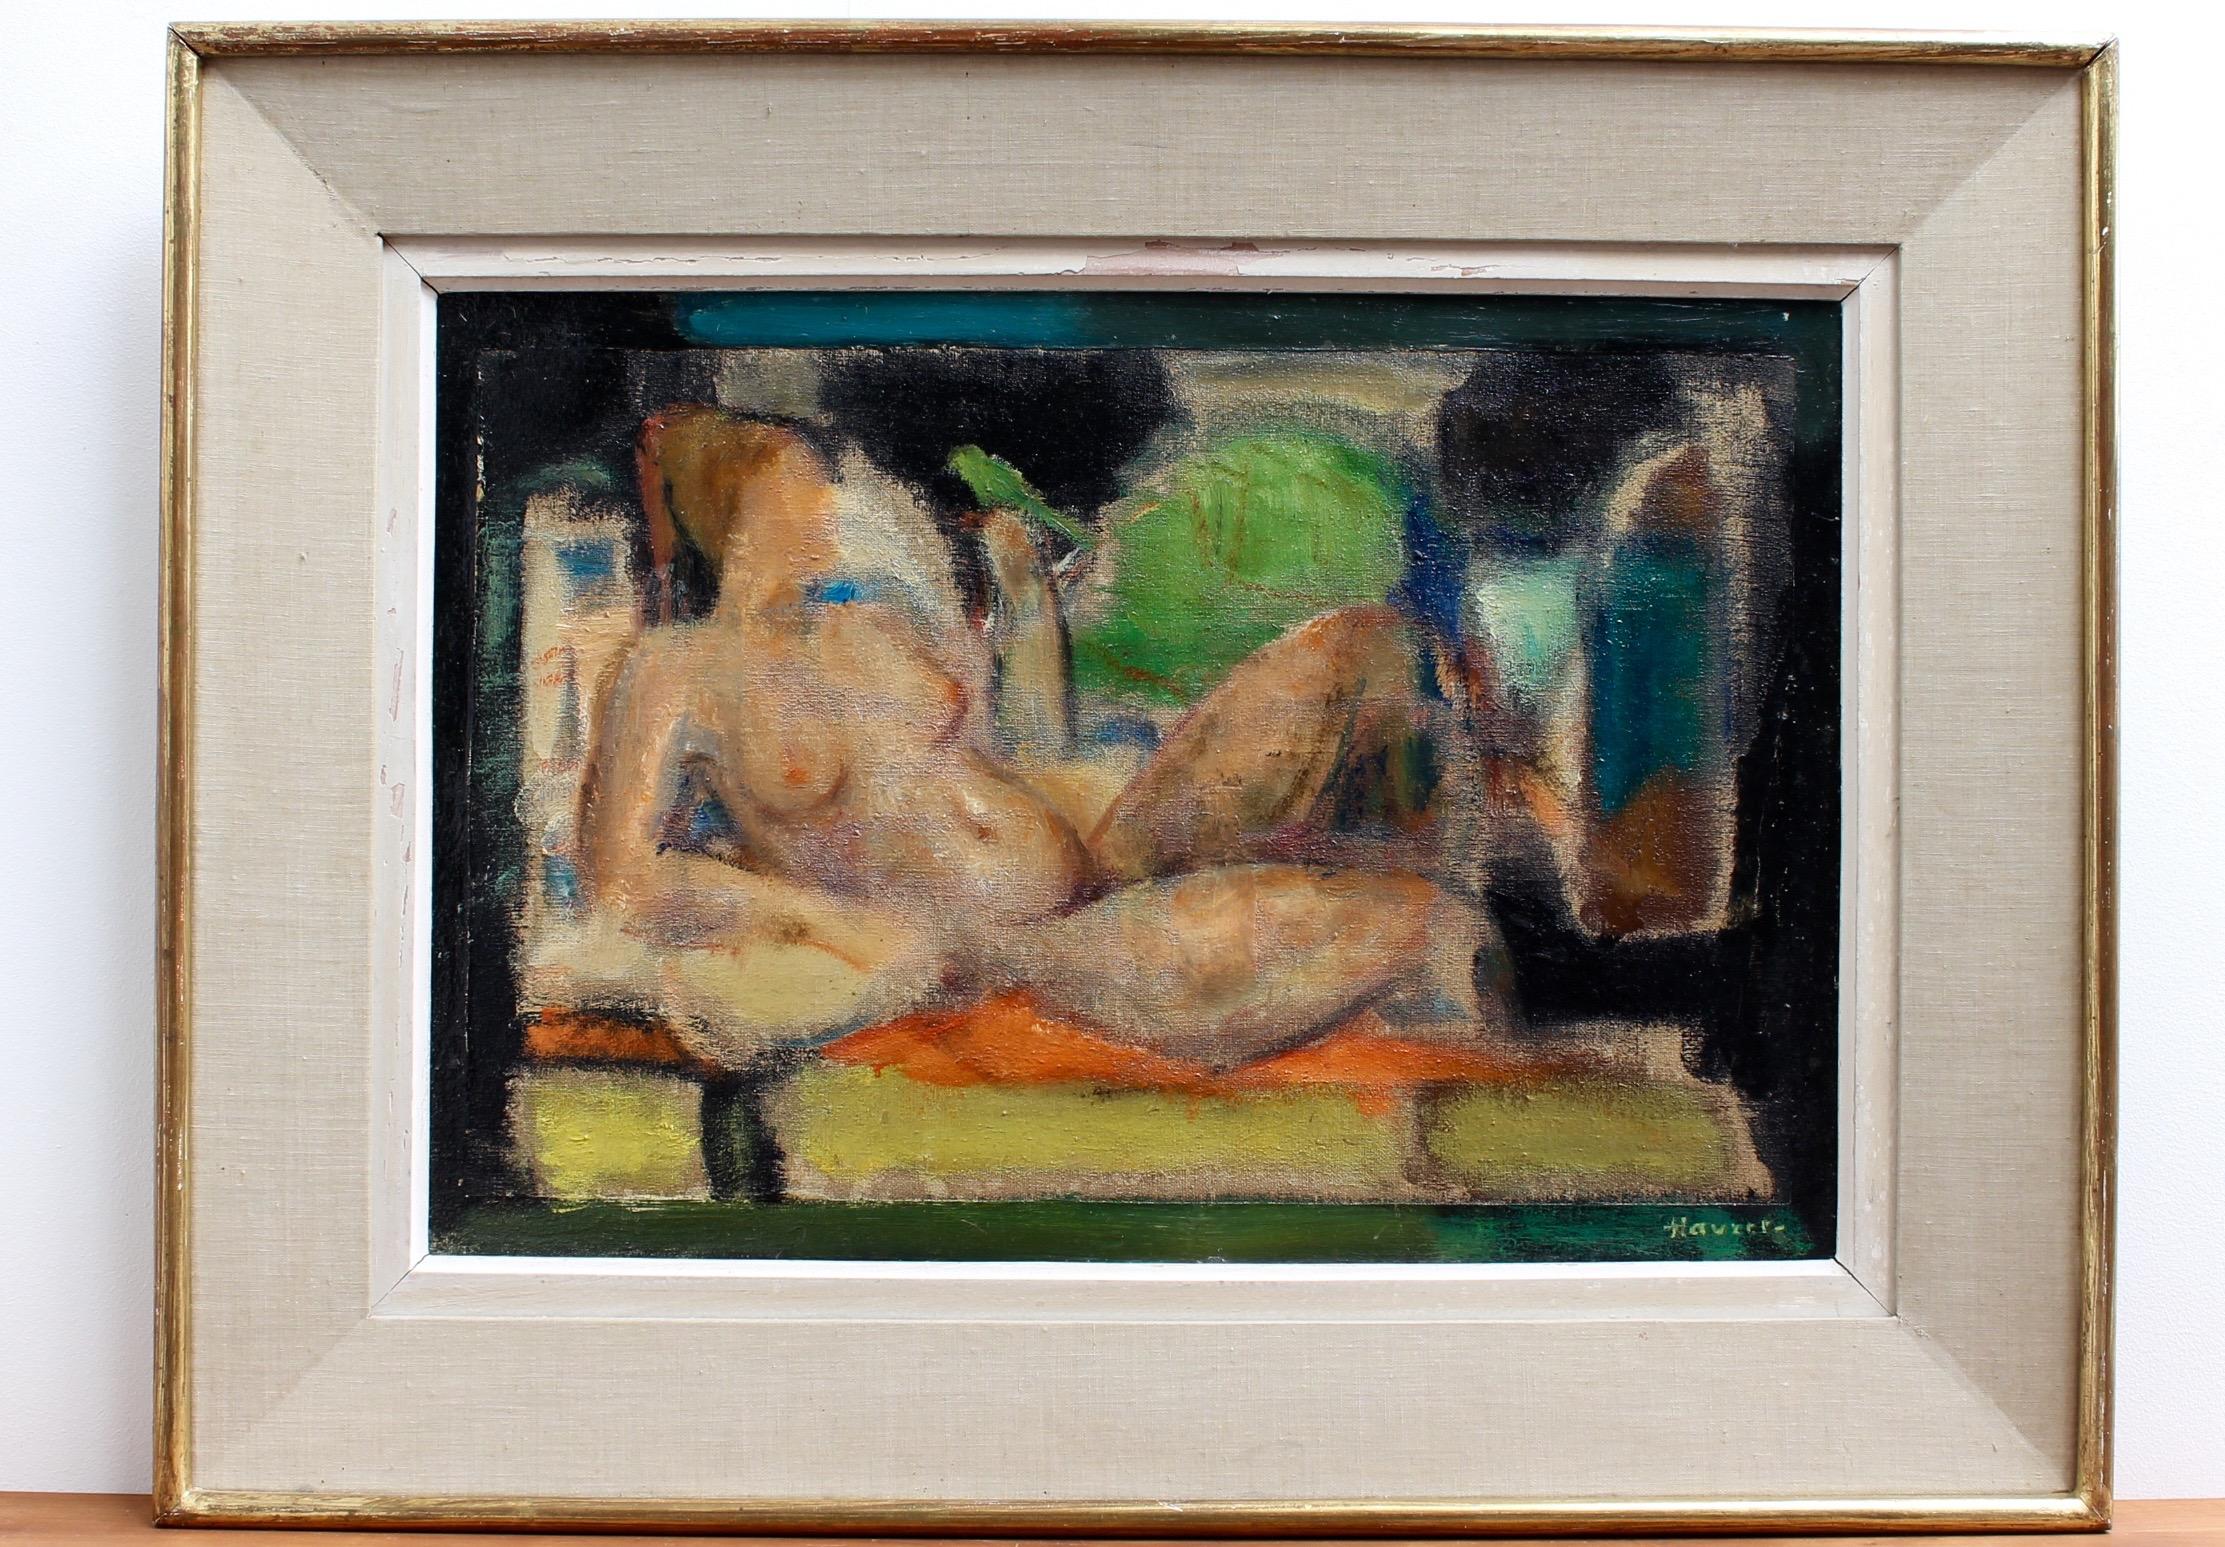 'Reclining Nude with Parakeet' by L Hauet, Oil Portrait Painting circa 1950s - Brown Abstract Painting by L Hauet 